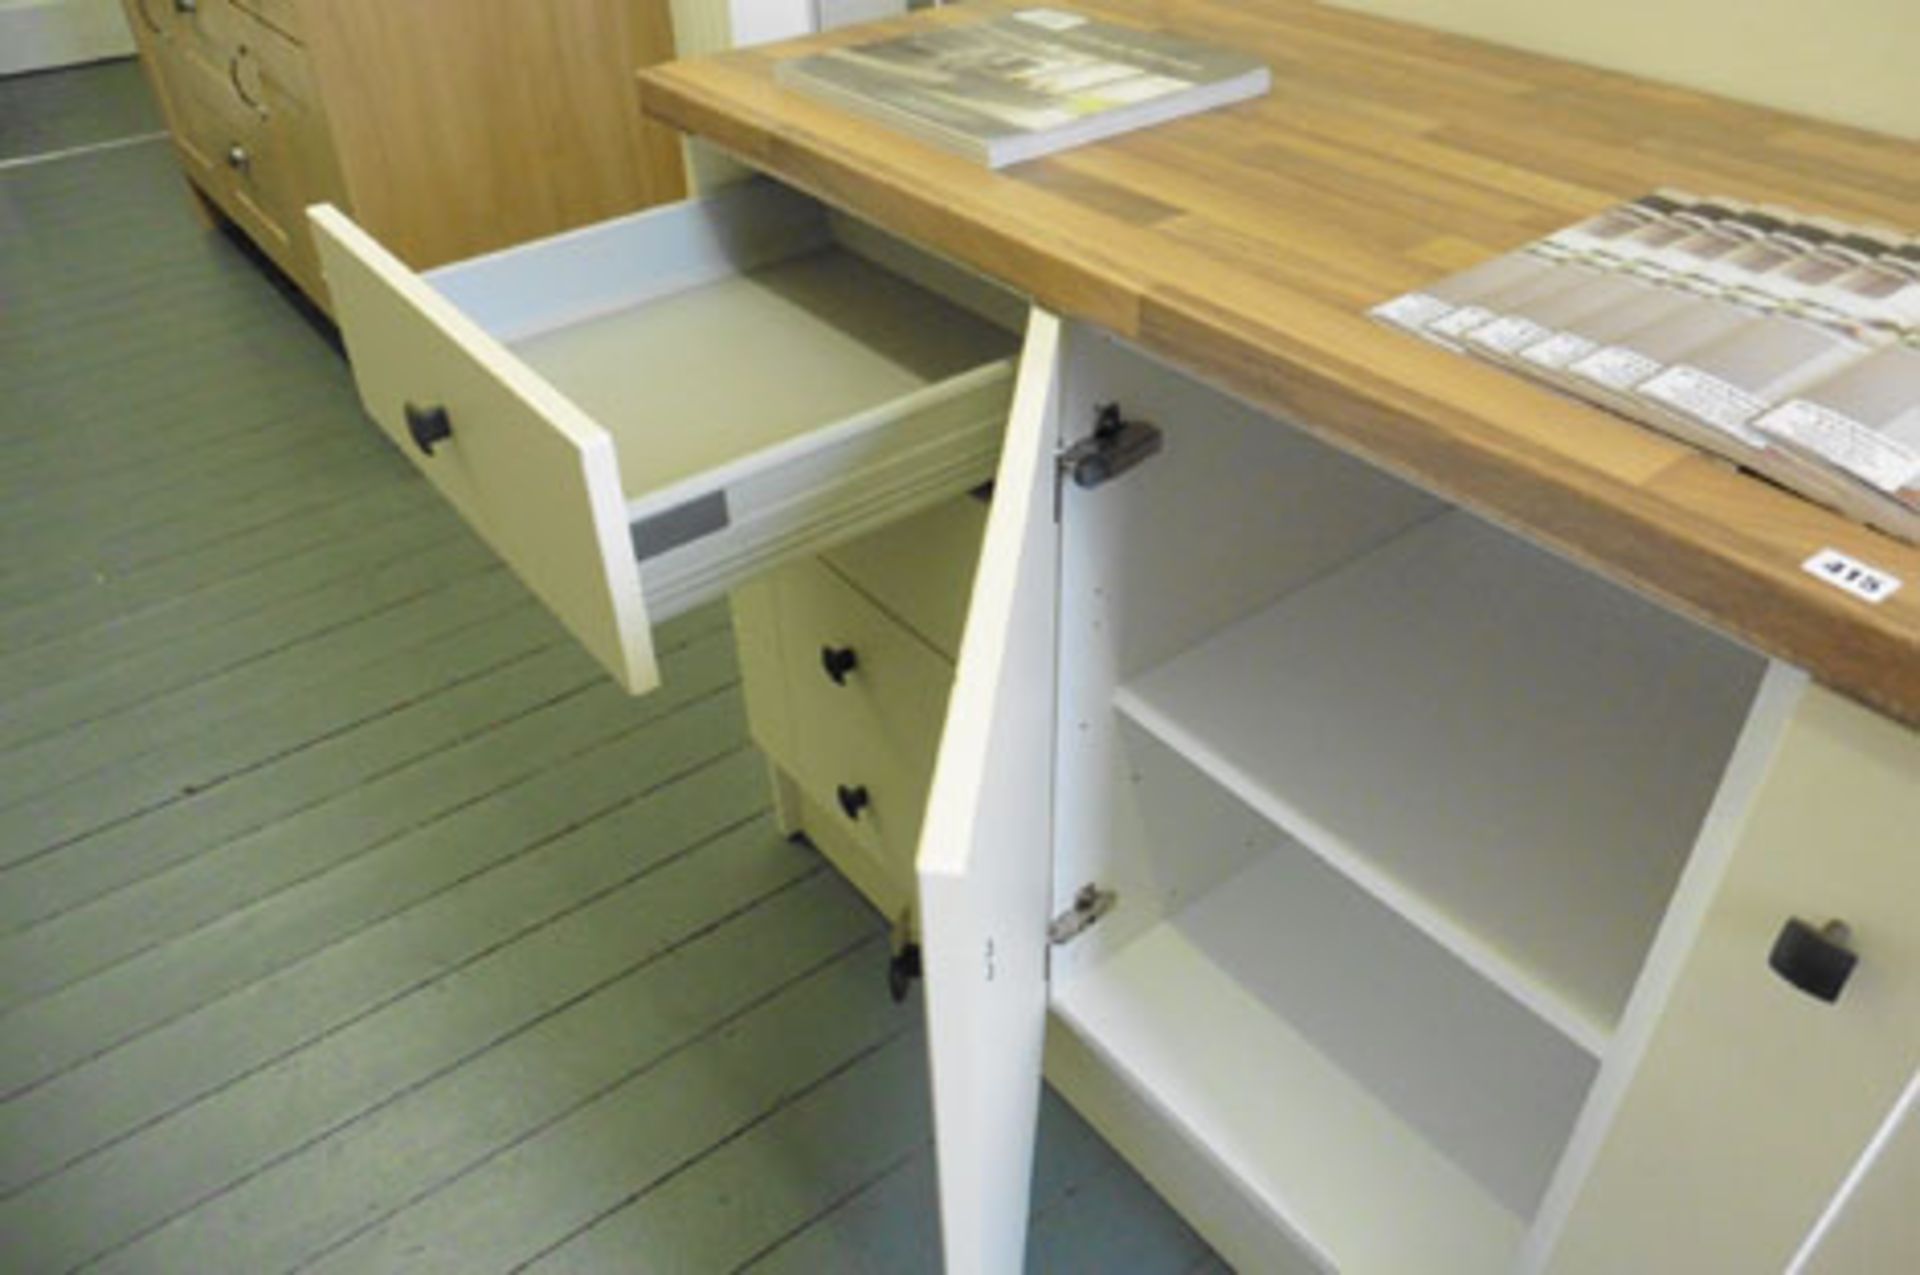 Buttercup cream shaker-style kitchen display with a wood-effect worktop, approximate width: 261 cm - Image 3 of 3